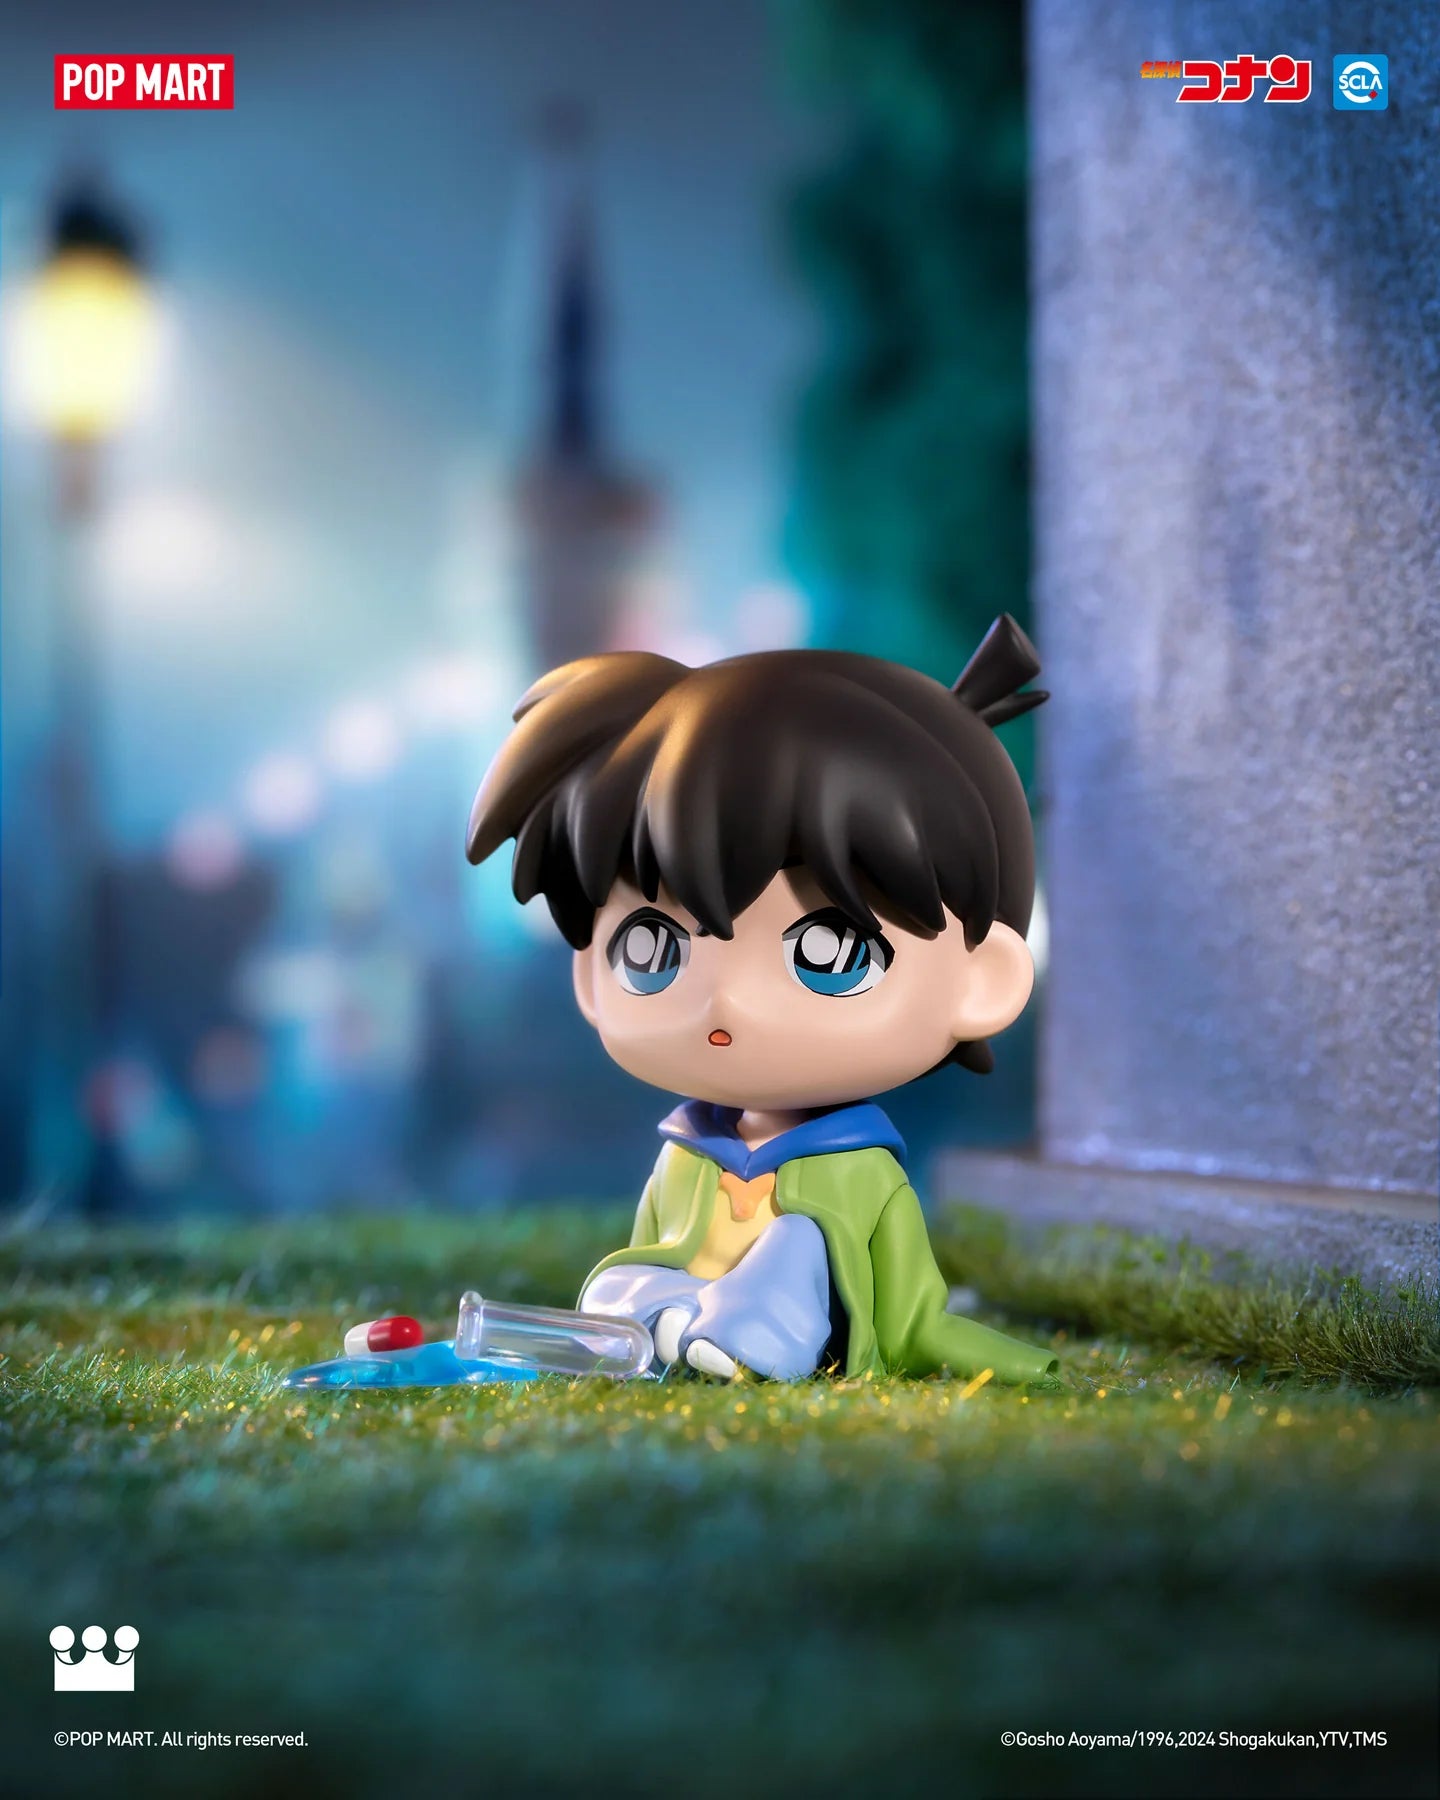 A toy figurine of a boy from Detective Conan Carnival Blind Box Series.